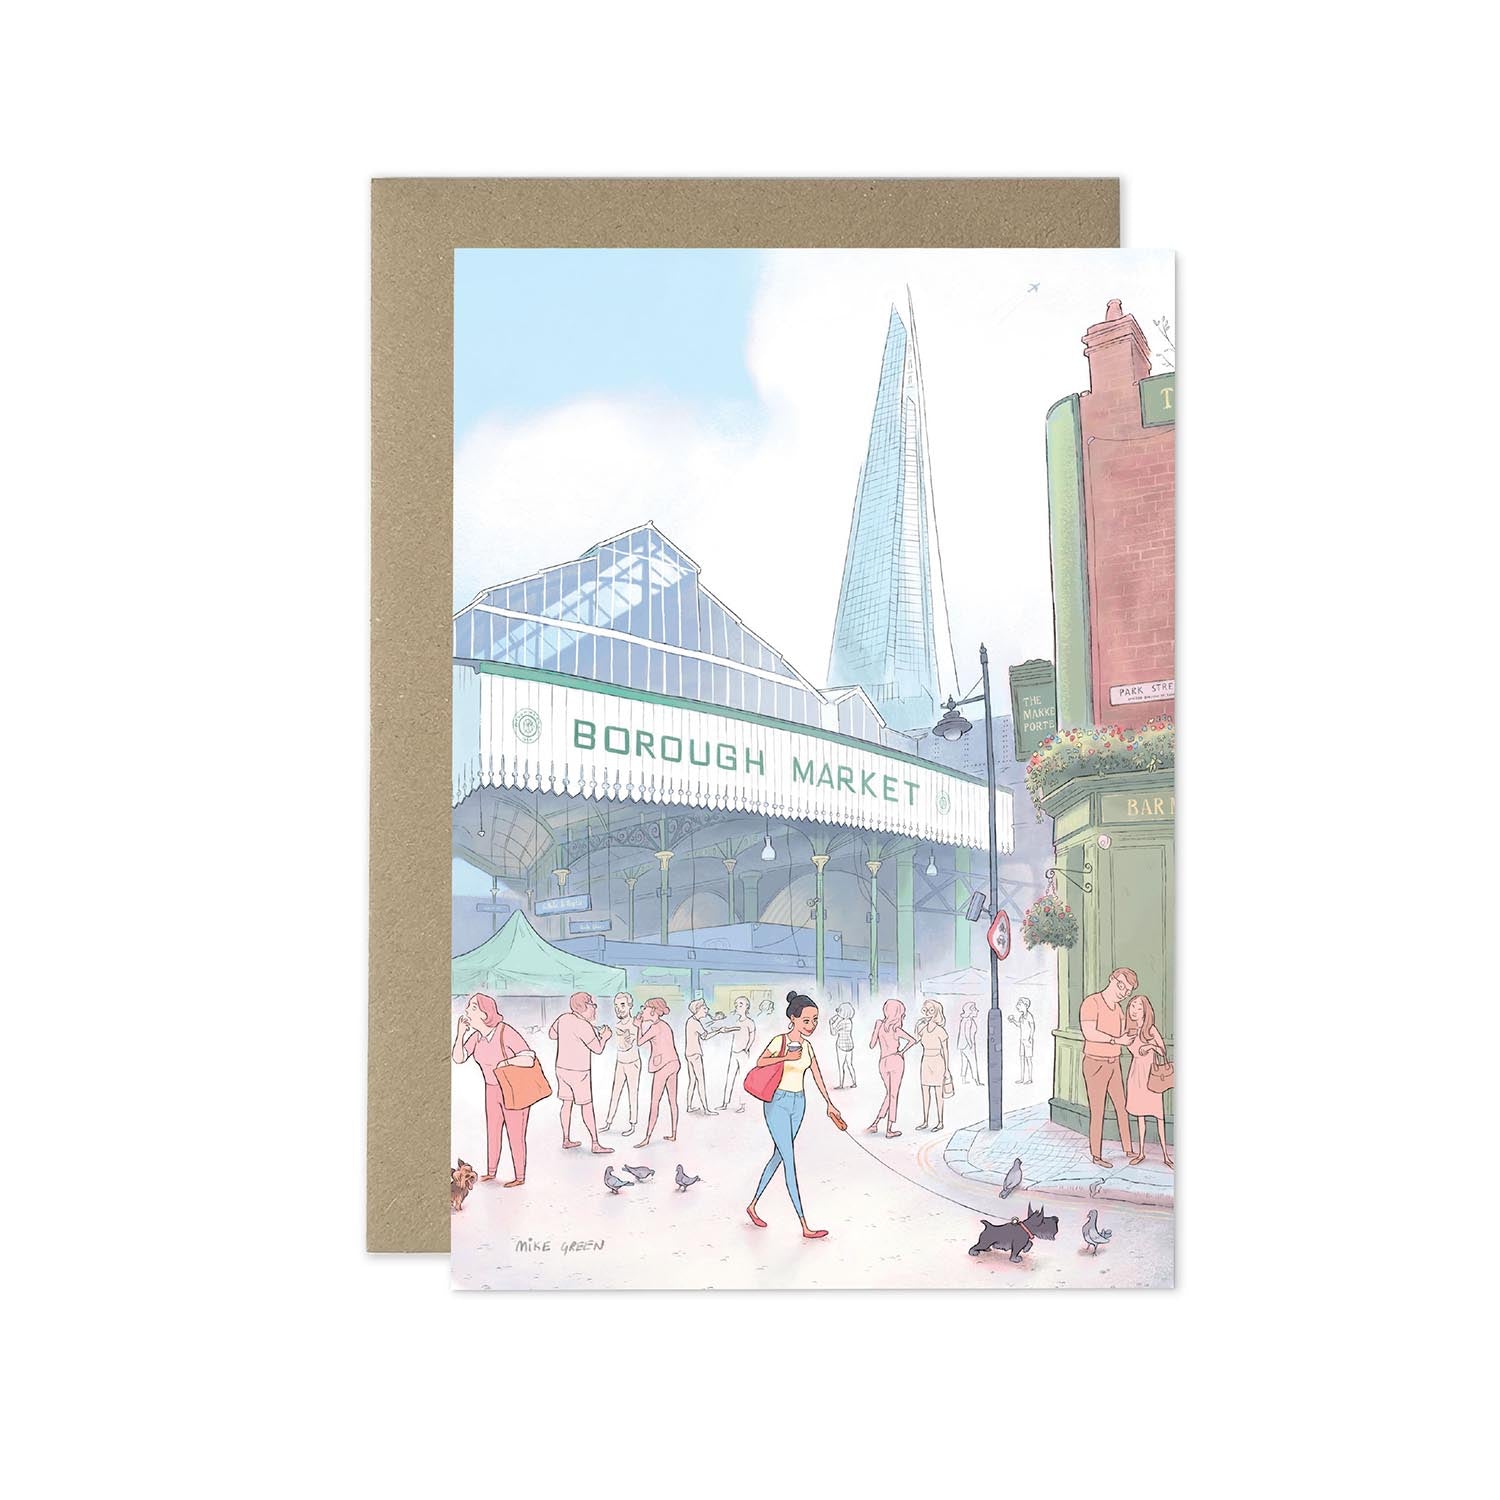 A lady and her dog in London's Borough Market beautifully illustrated on a greeting card by mike green illustration.